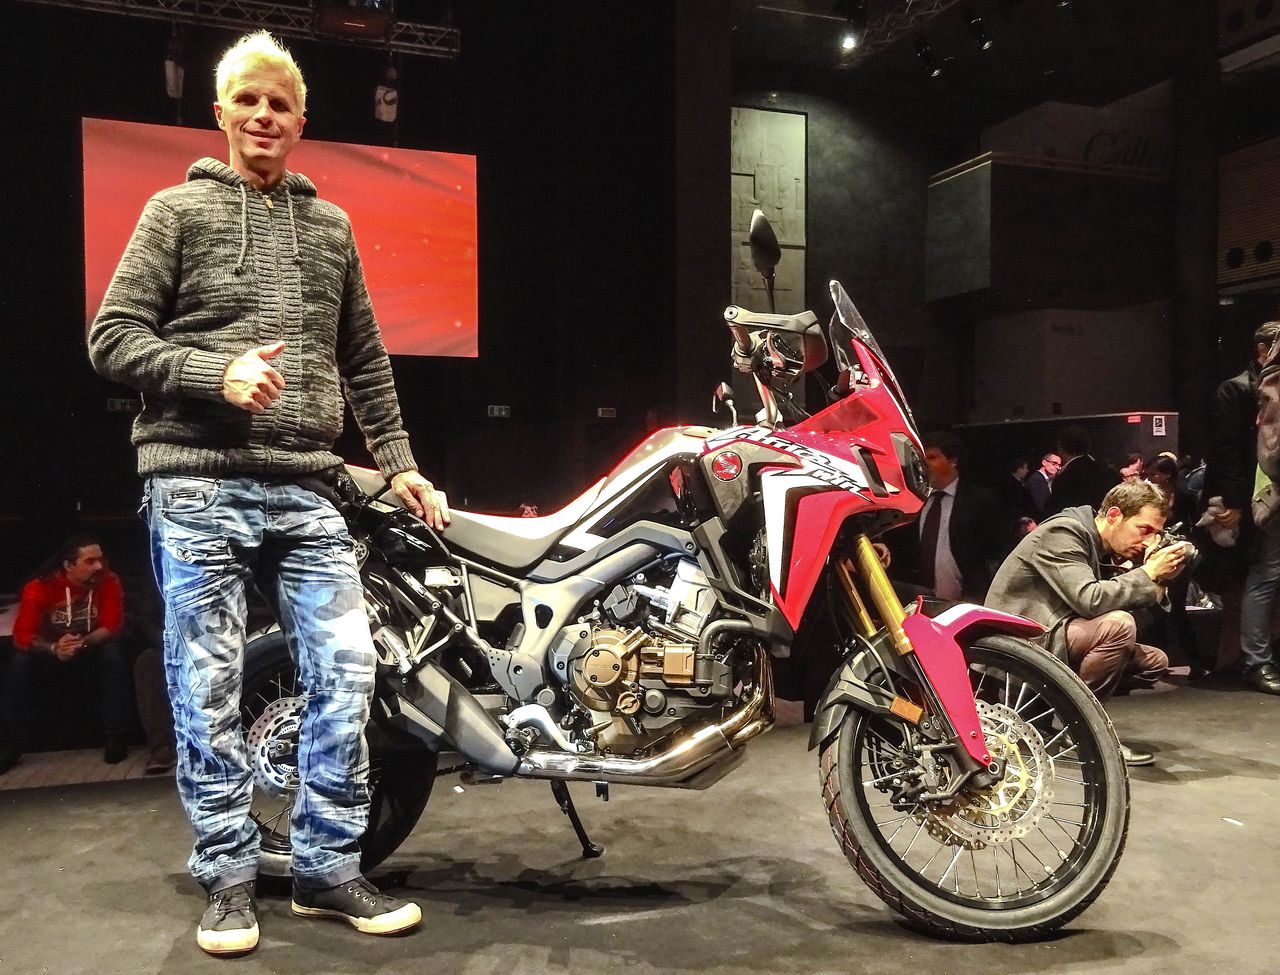 Joze next to the Africa Twin 2015 at EICMA 2015